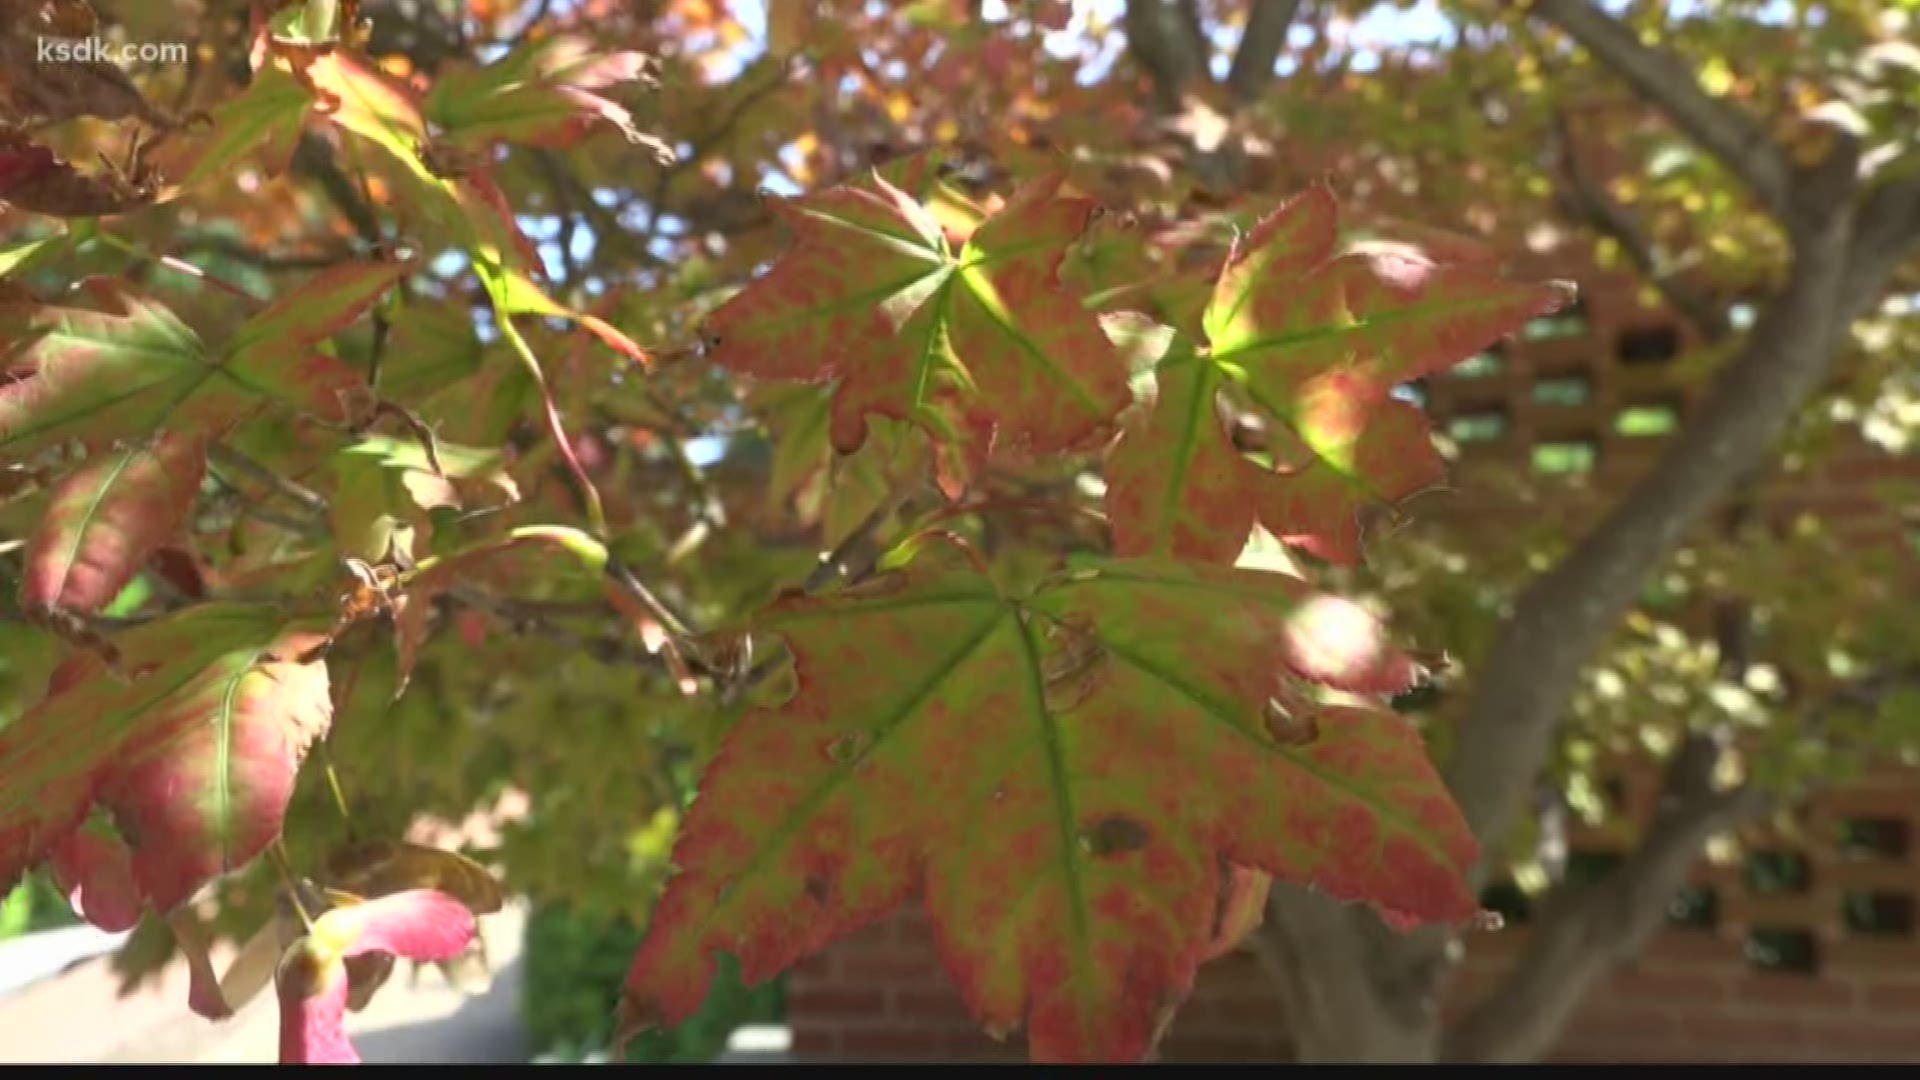 It’s still technically summer in the bi-state, but it won’t be long before the leaves in Missouri and Illinois start turning brilliant shades of red, orange, yellow and so many colors in-between.